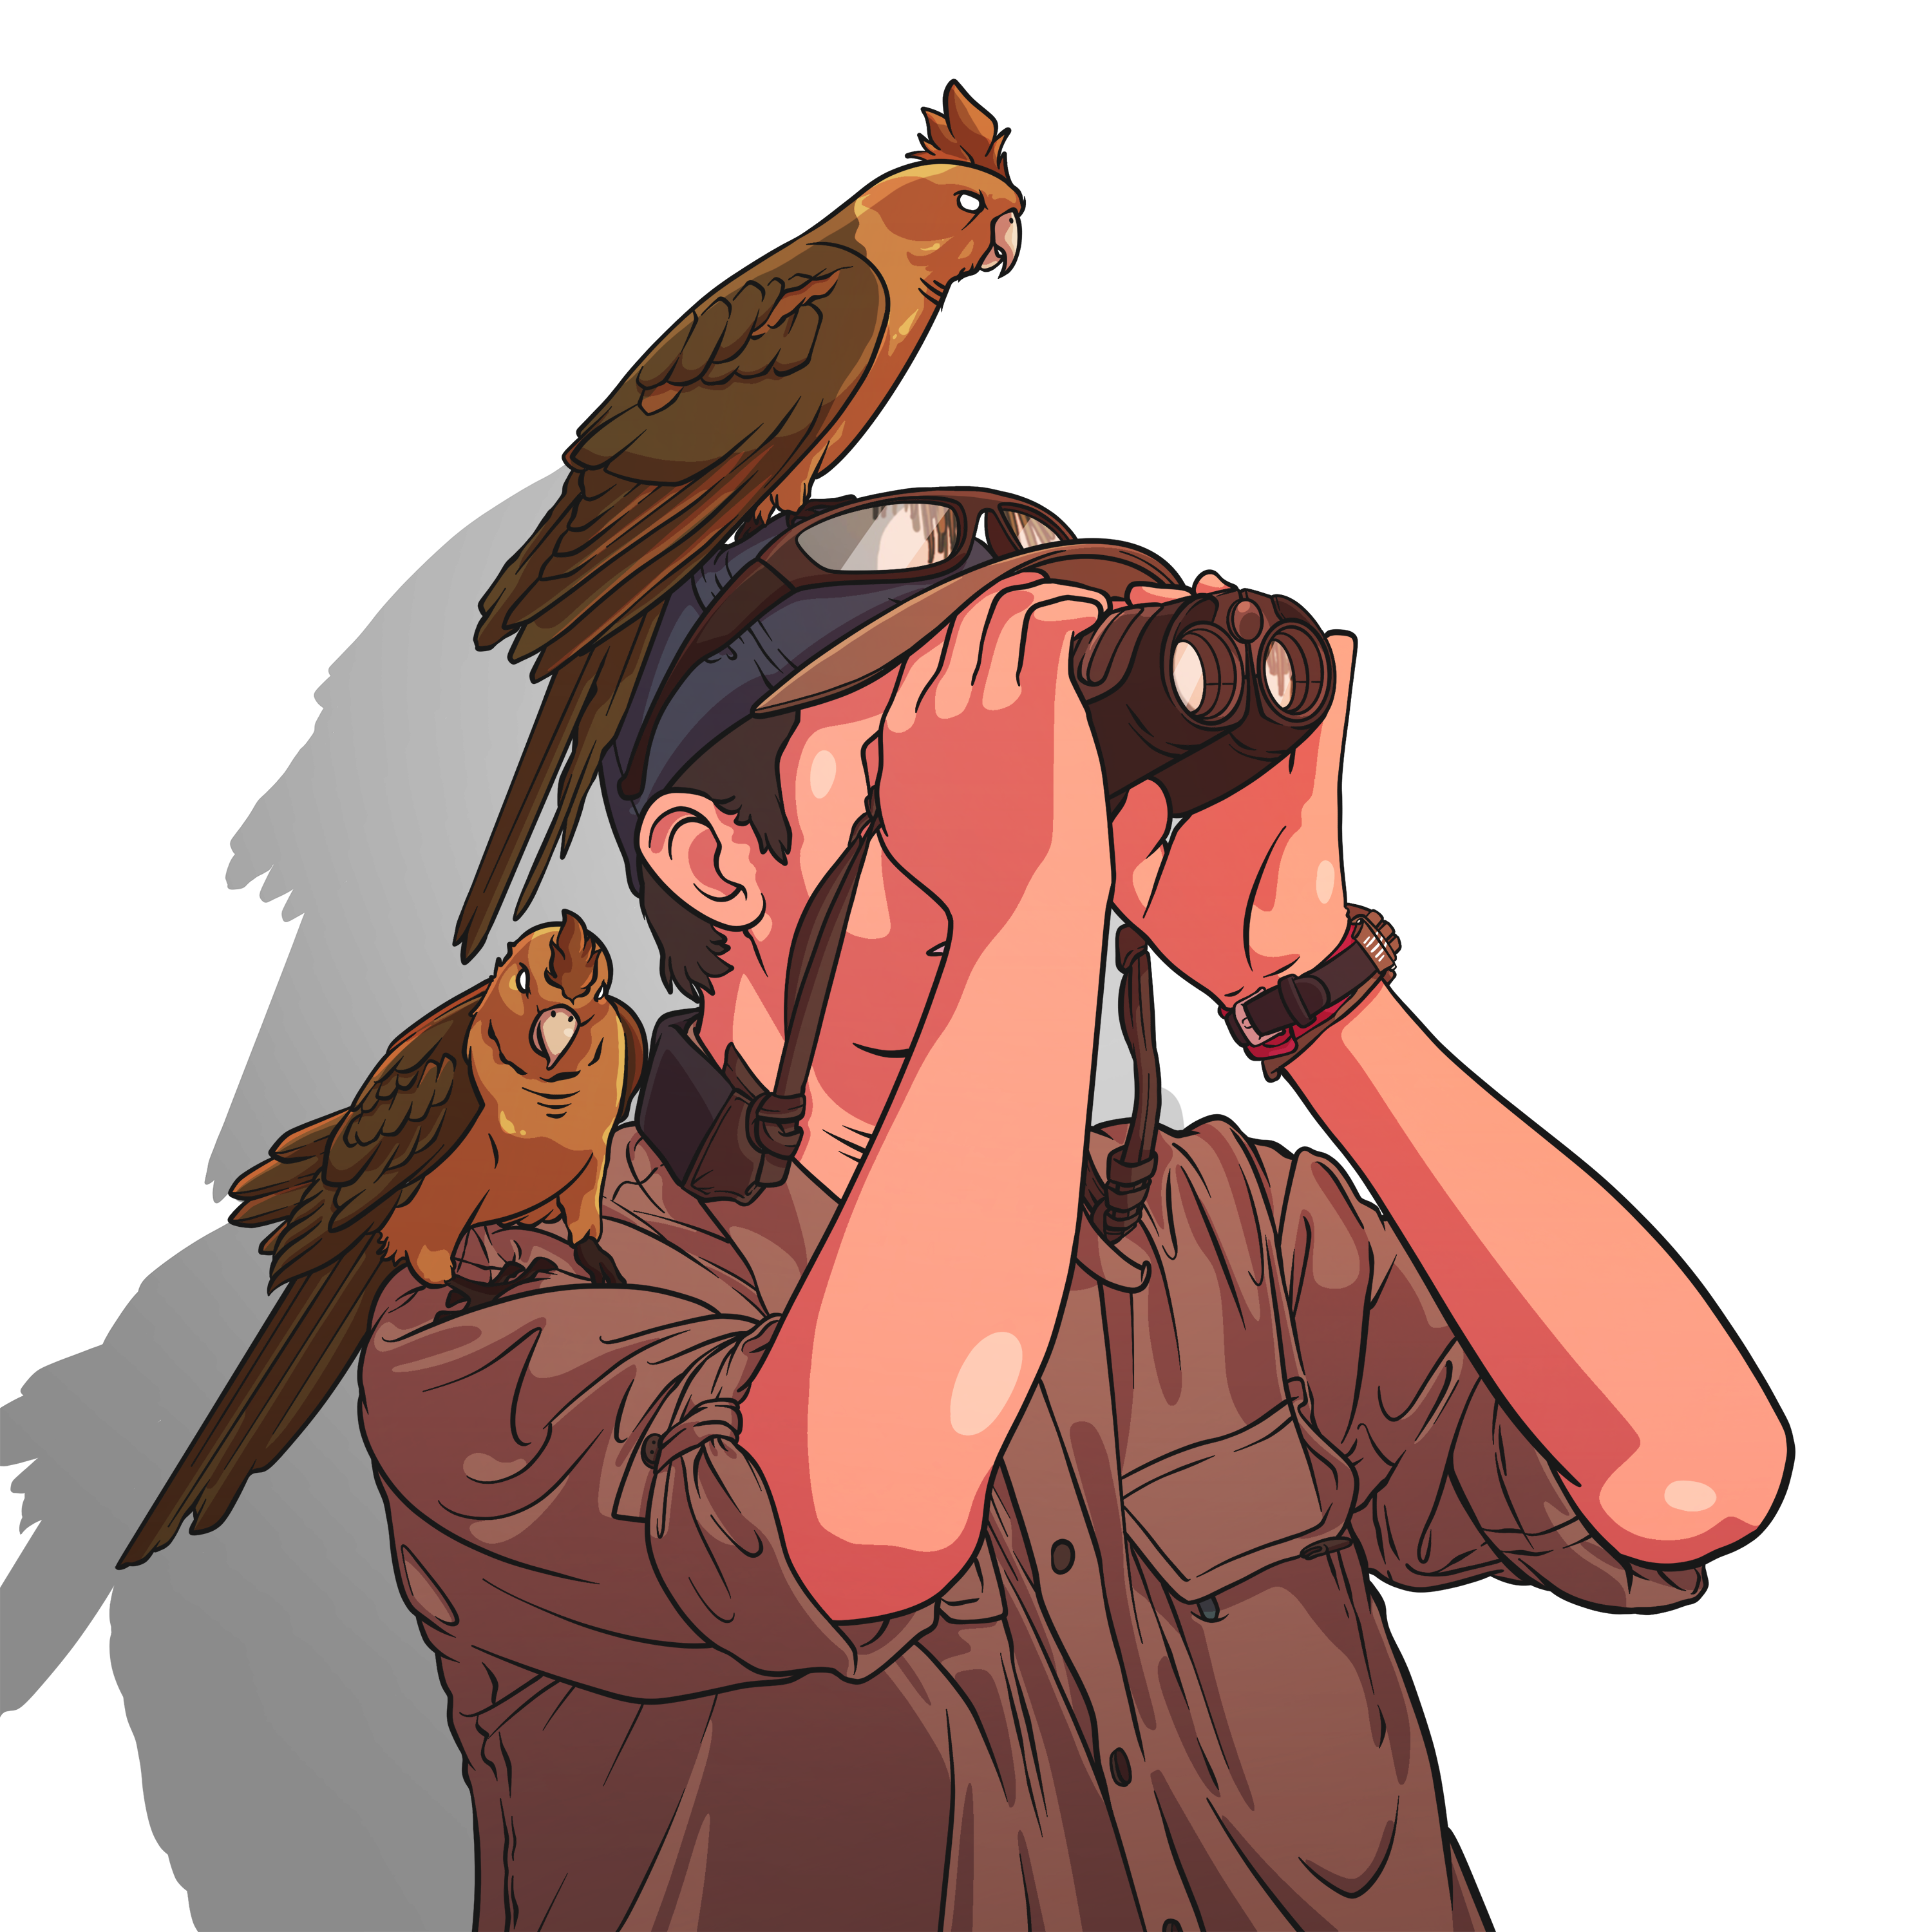 man using binoculars while two birds rest on his torso